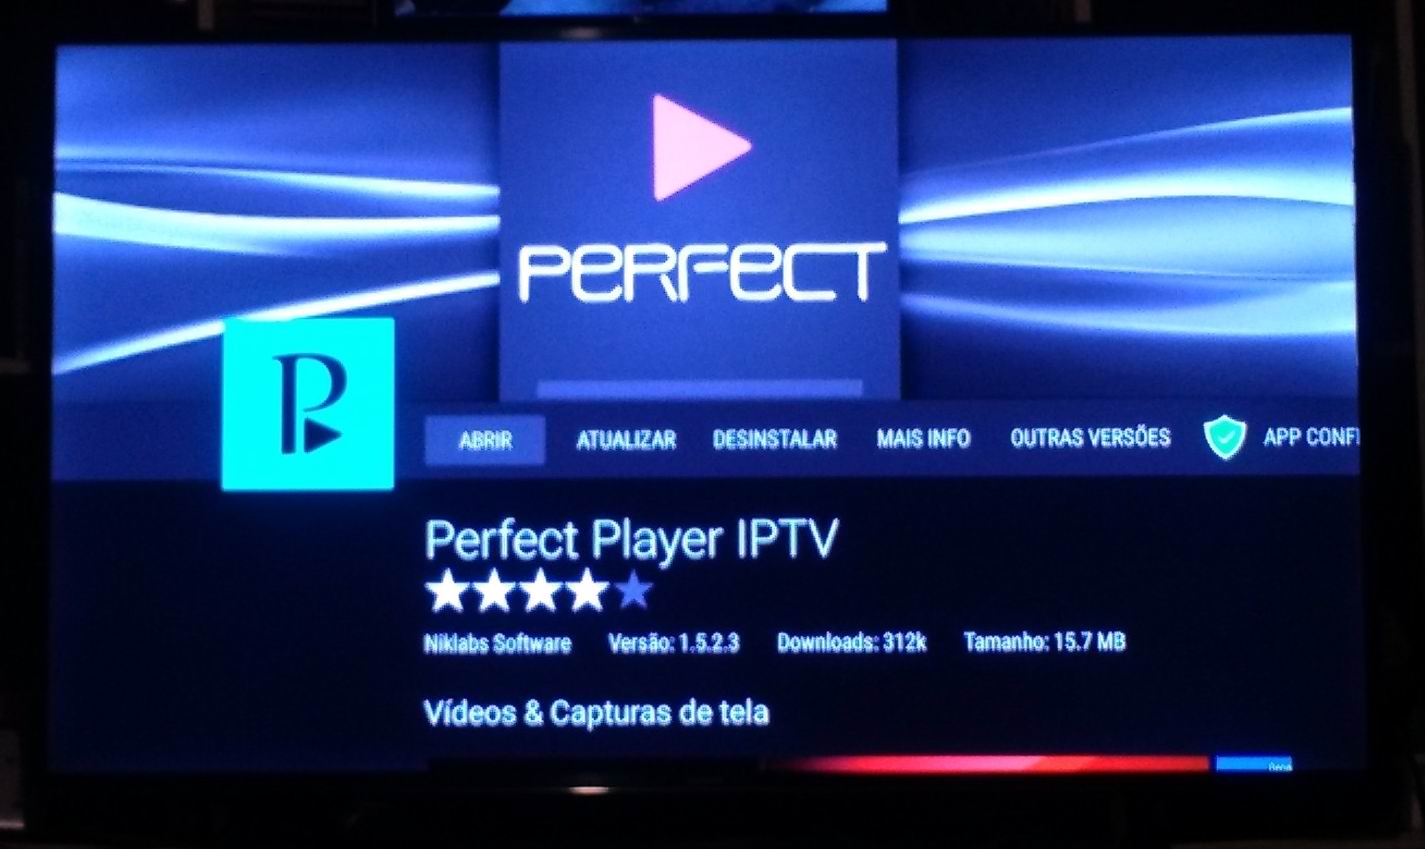 Perfect Player IPTV 1.5.2.3 APK Download by Niklabs Software